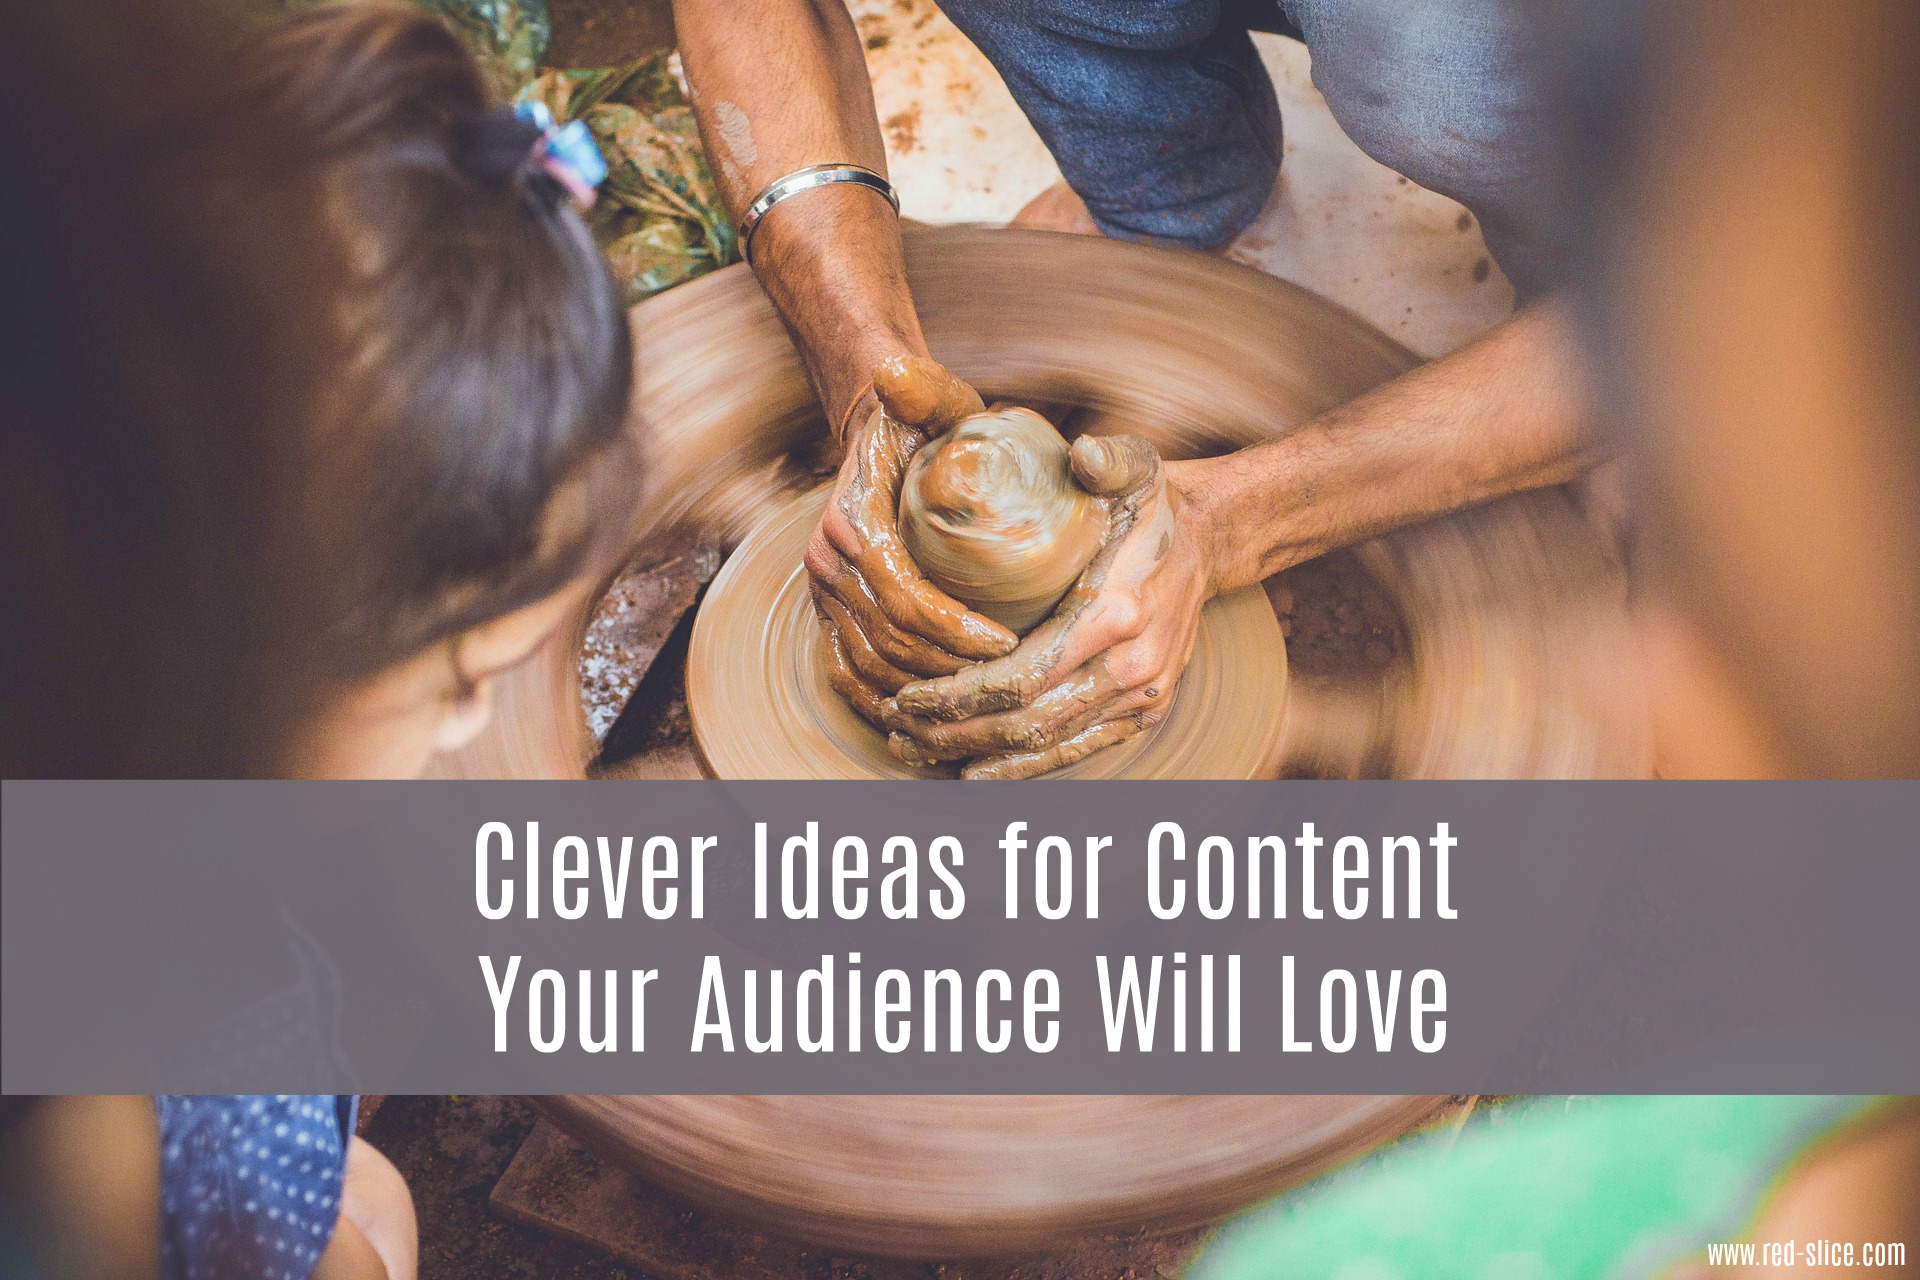 Content Marketing Success. Part 2: What Content to Create?